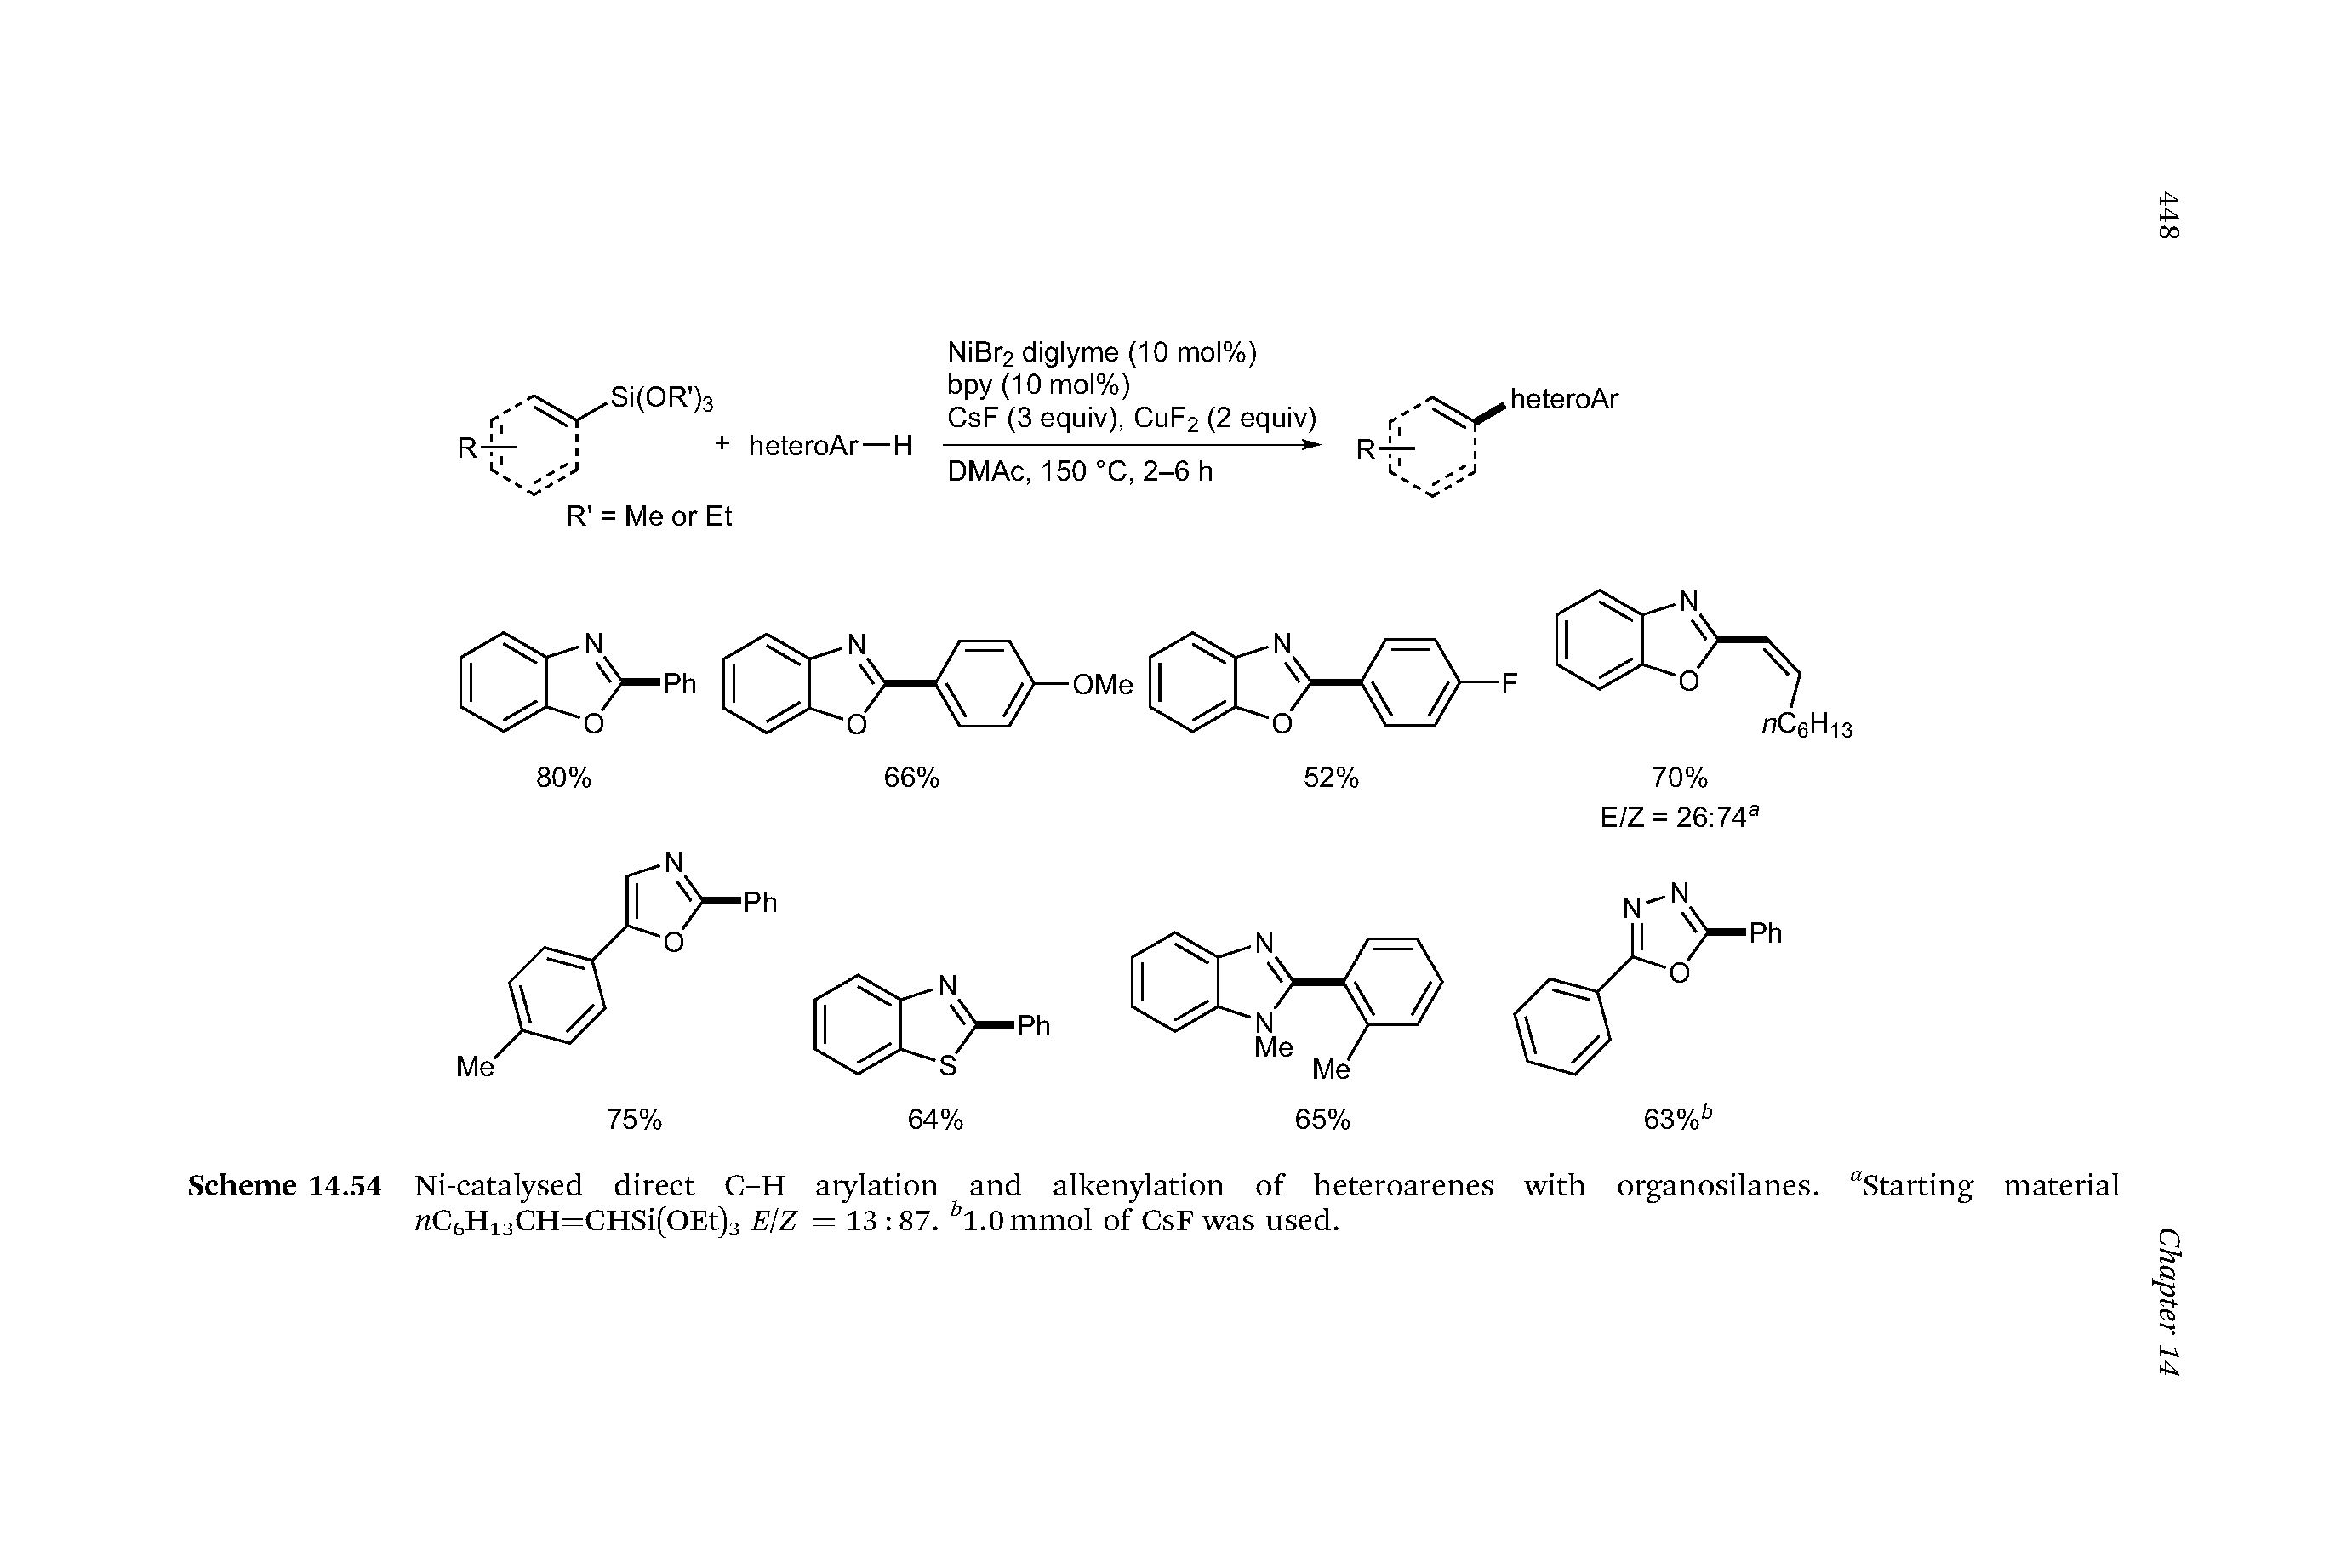 Scheme 14.54 Ni-catalysed direct C-H arylation and alkenylation of heteroarenes with organosilanes. Starting material wC6Hi3CH=CHSi(OEt)3 EjZ — 13 87. 1.0 mmol of CsF was used.